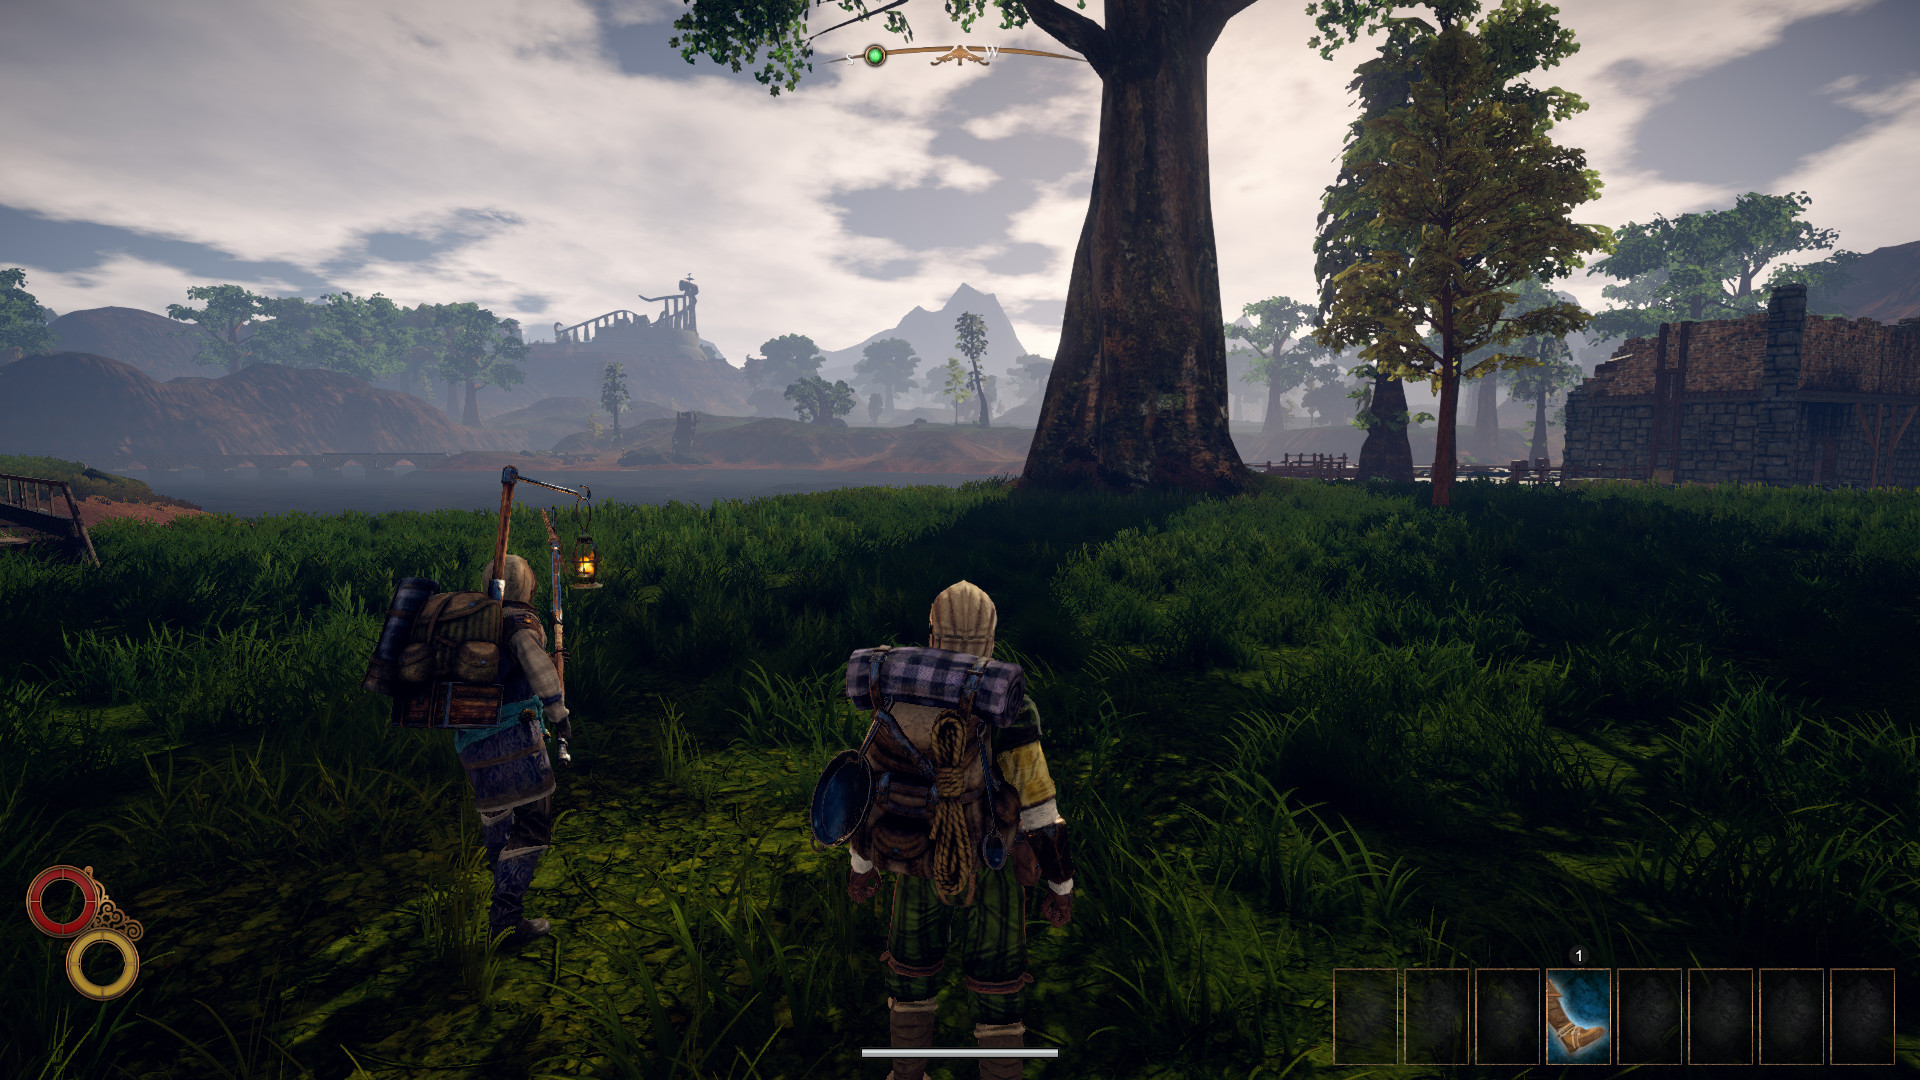 Screenshot for the game Outward [1.3.2 (44032)] (2019) download torrent RePack from R. G. Mechanics